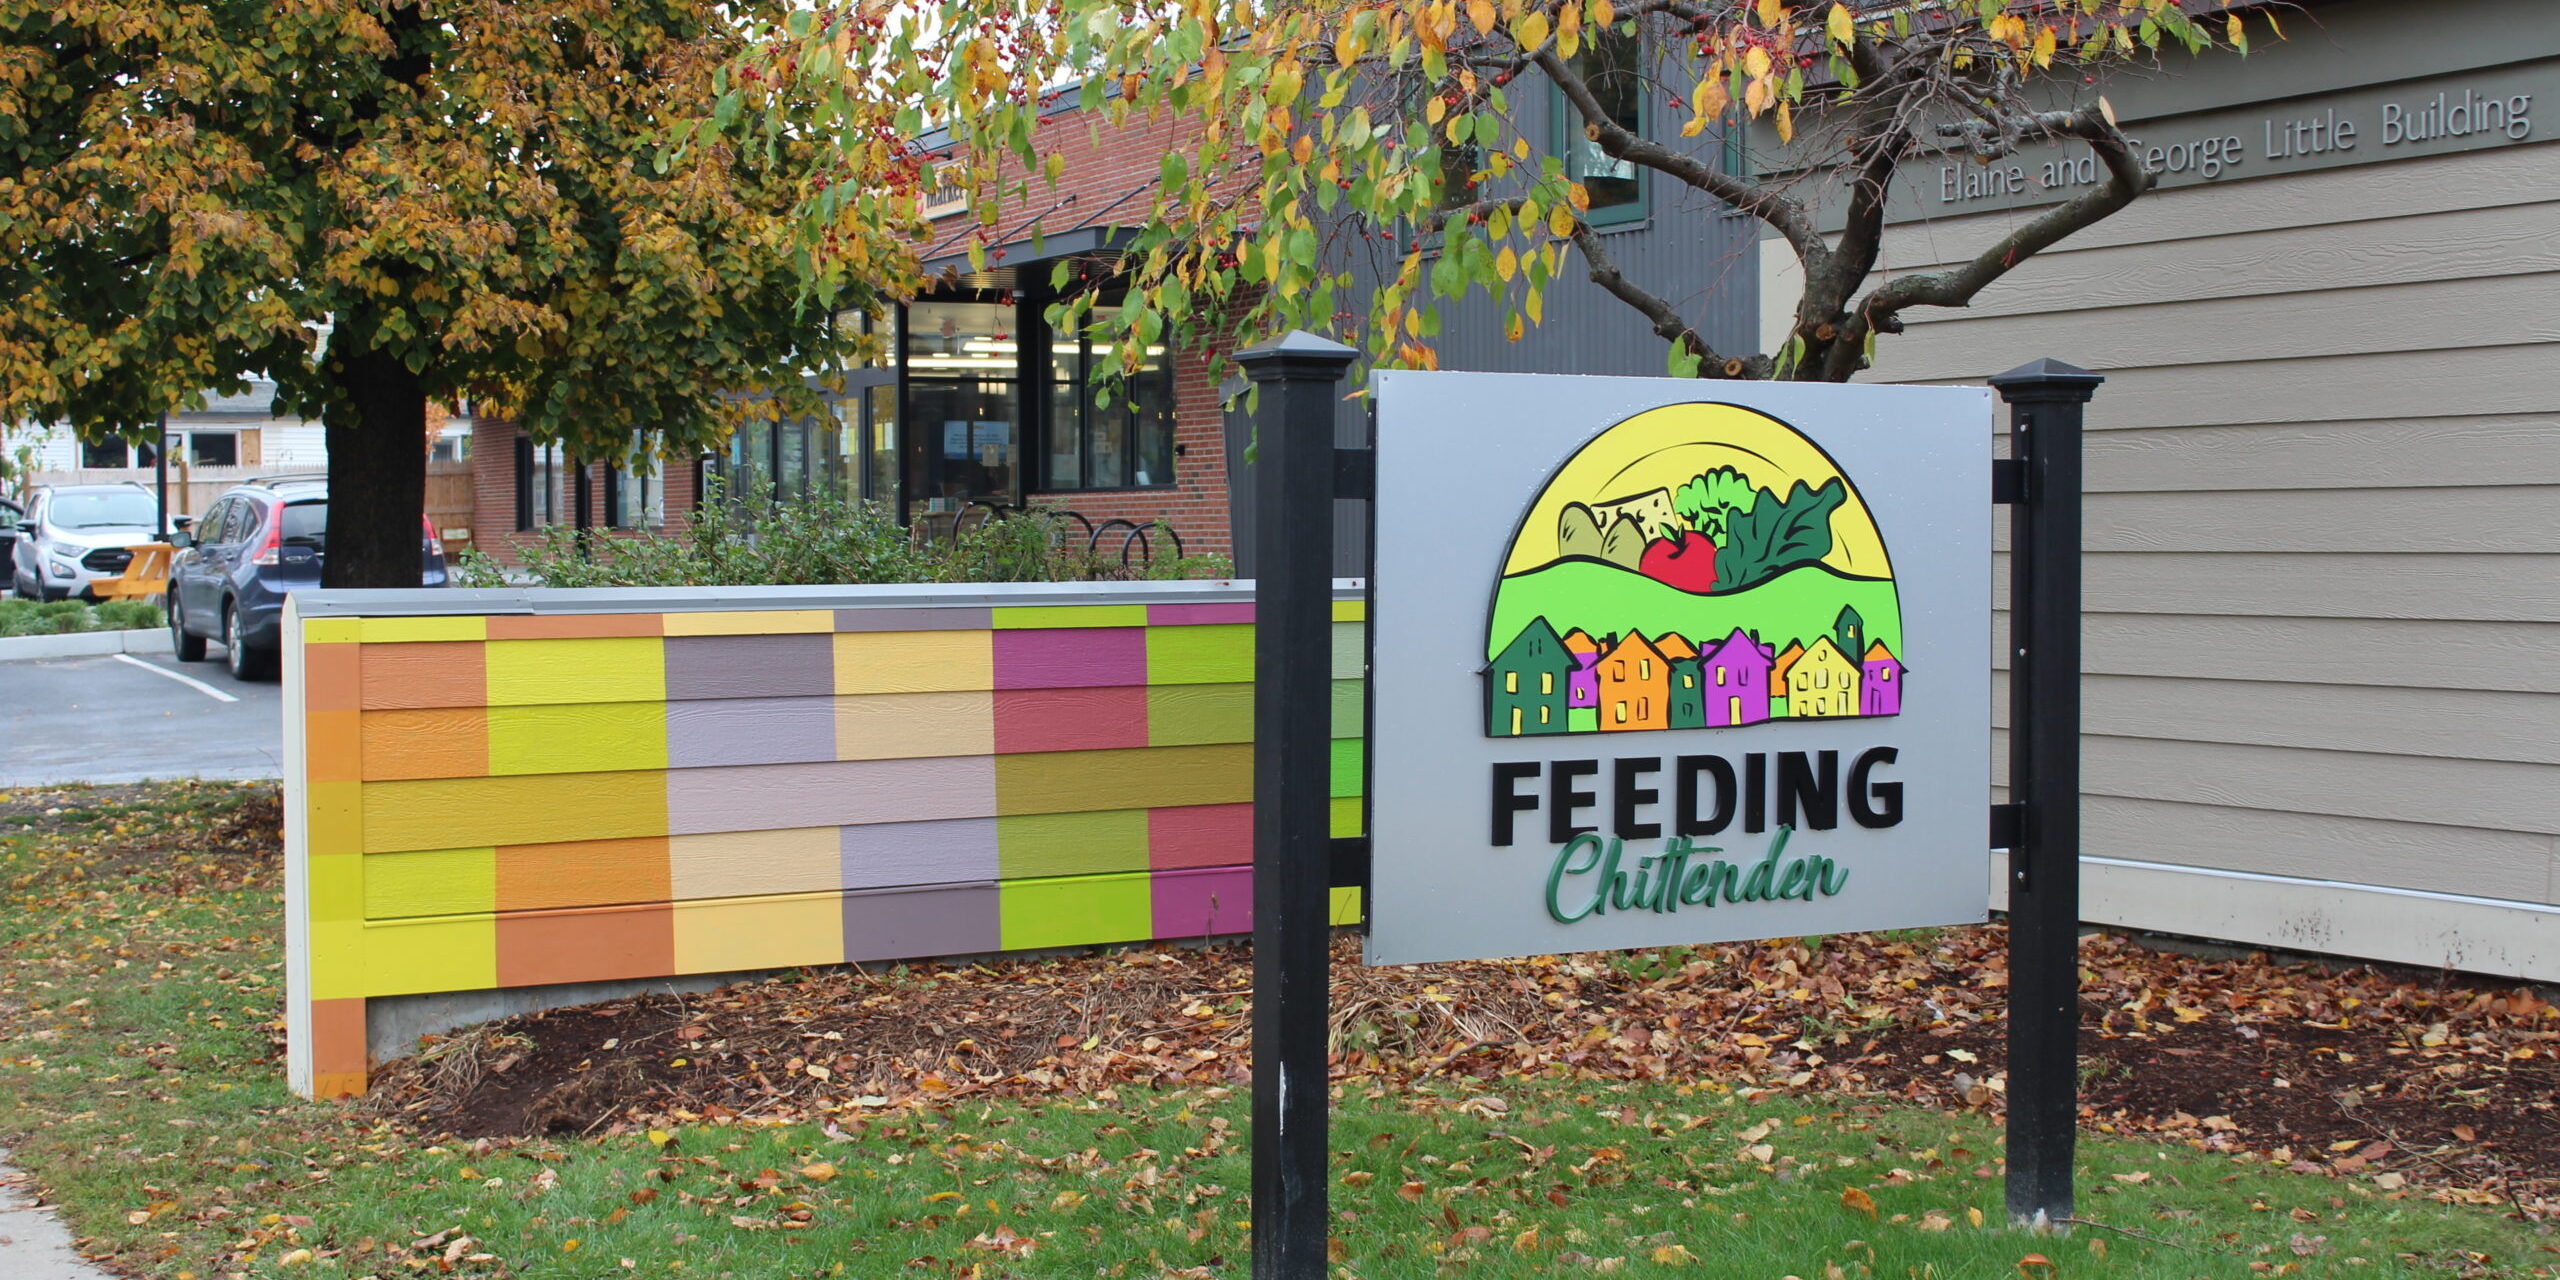 Feeding Chittenden - Working towards alleviating hunger by feeding people and cultivating opportunities.